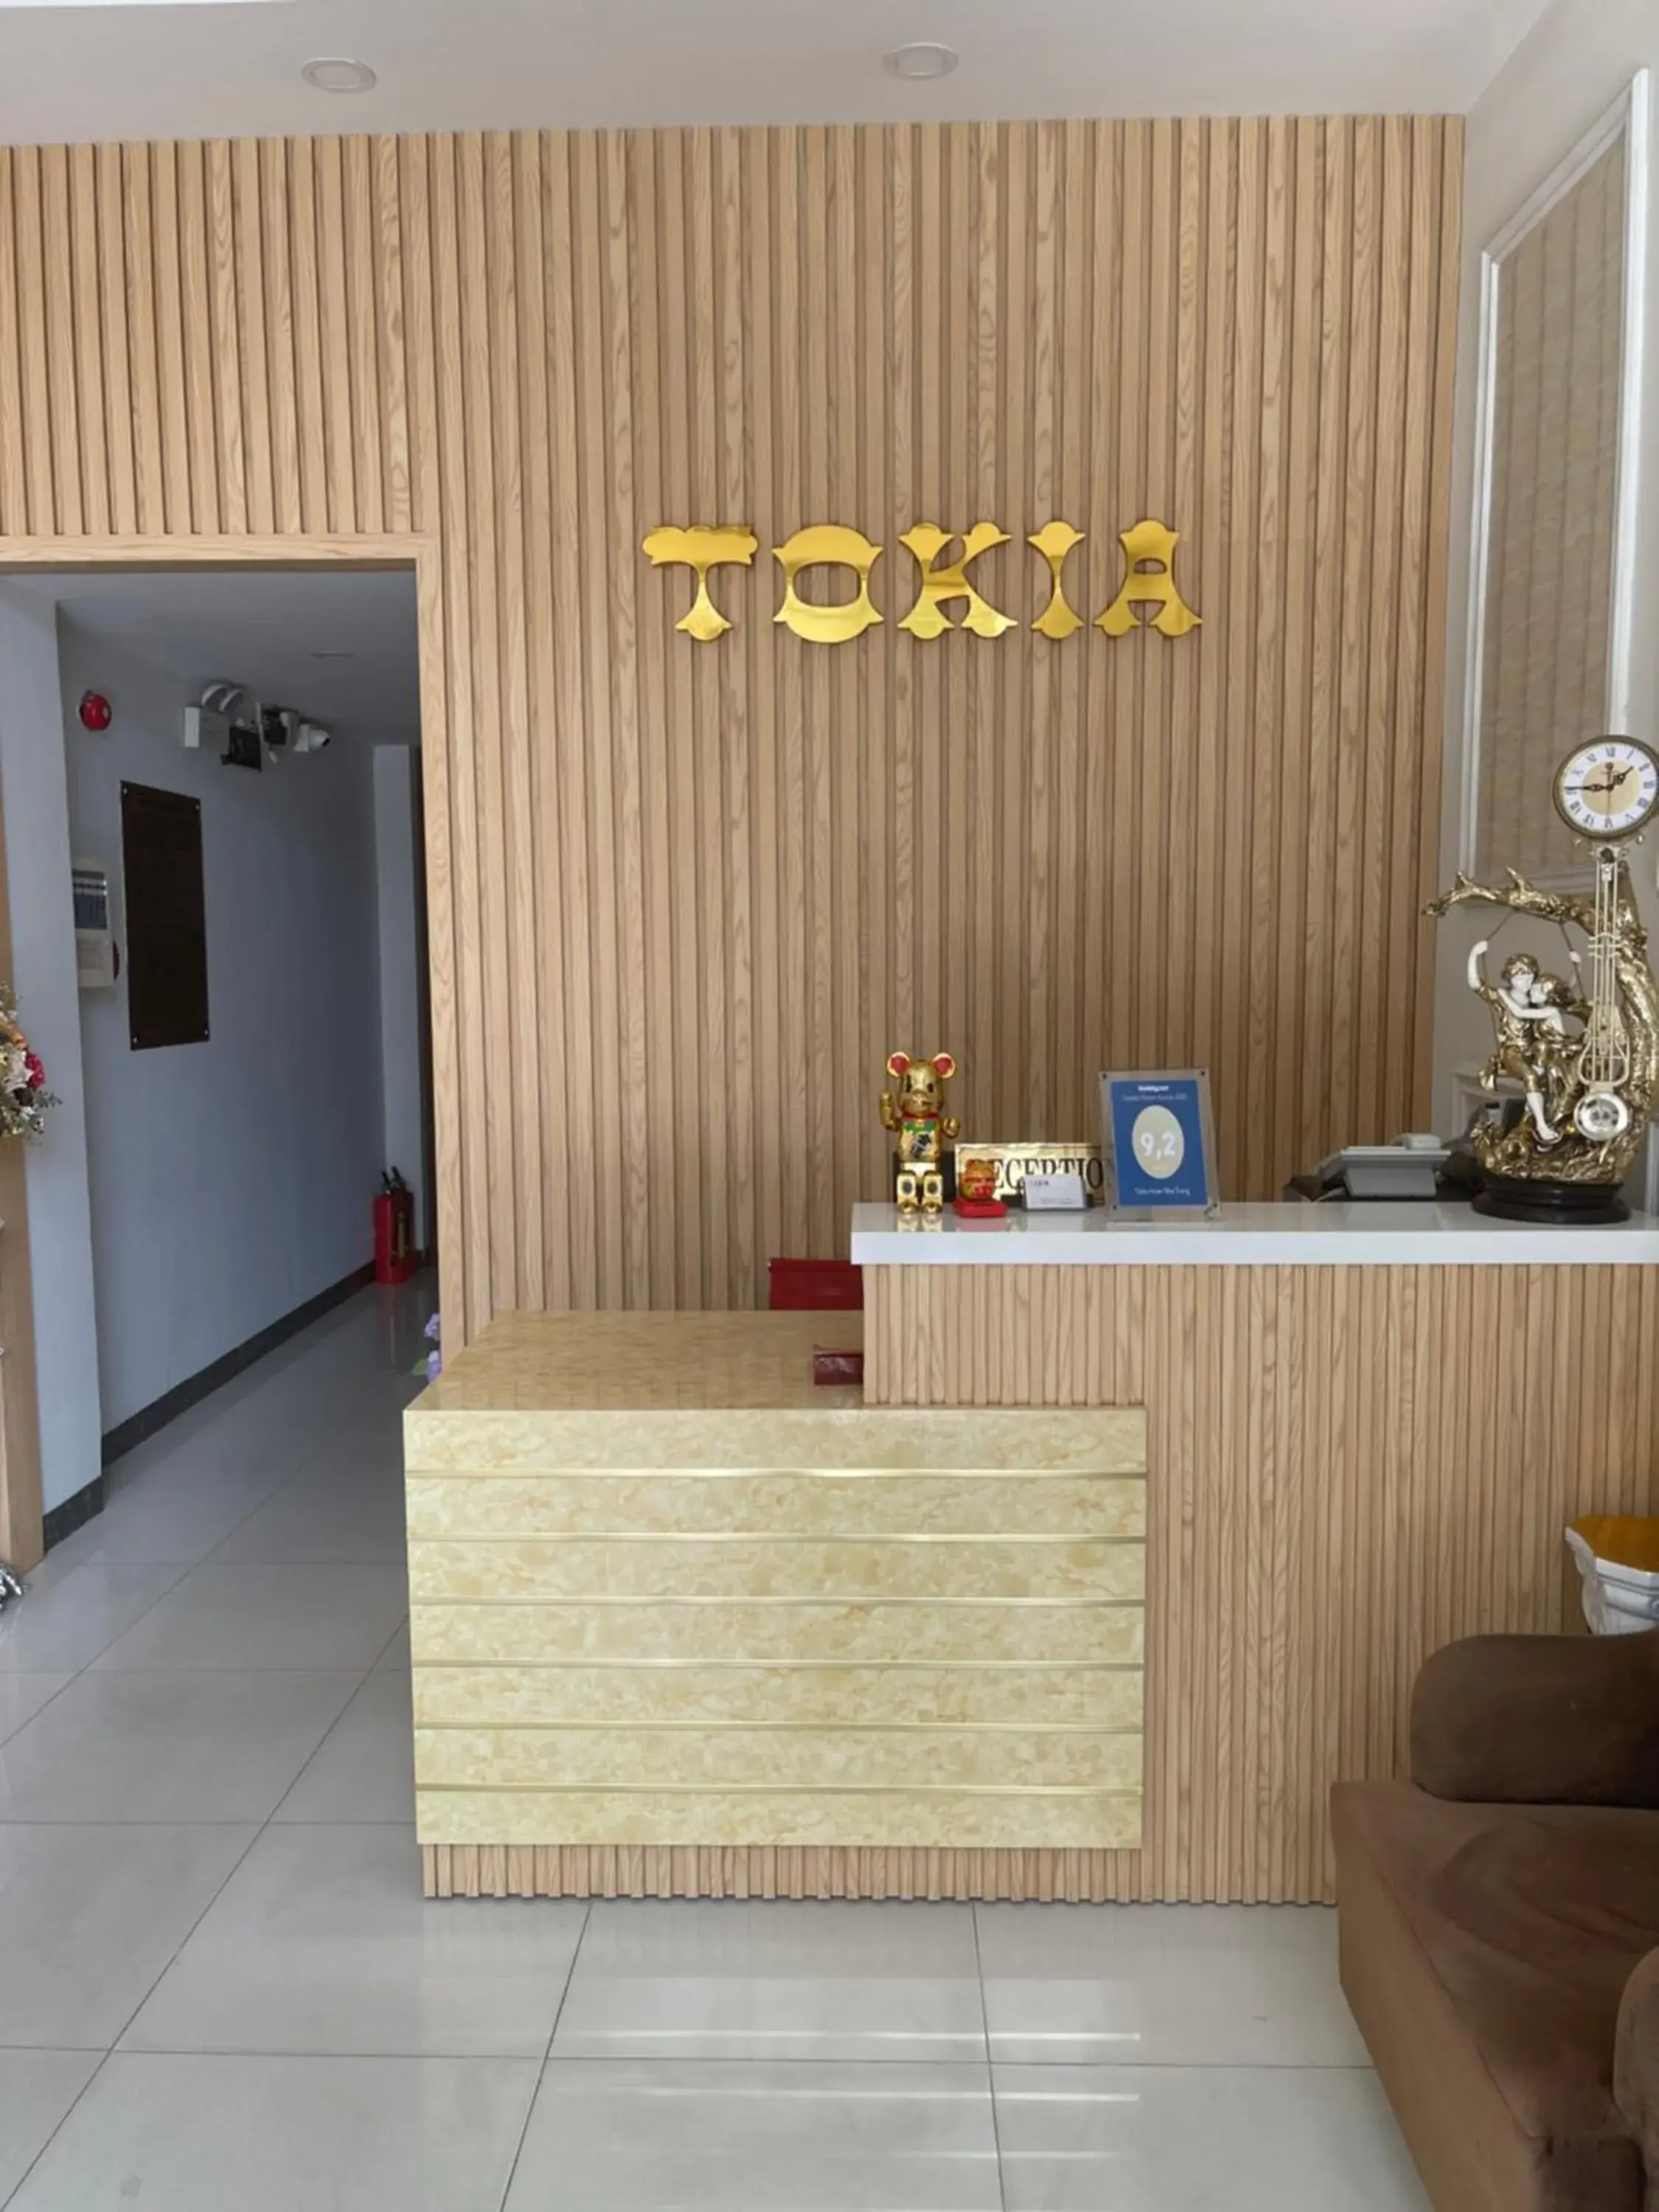 Logo/Certificate/Sign, Lobby/Reception in Tokia hotel nha trang